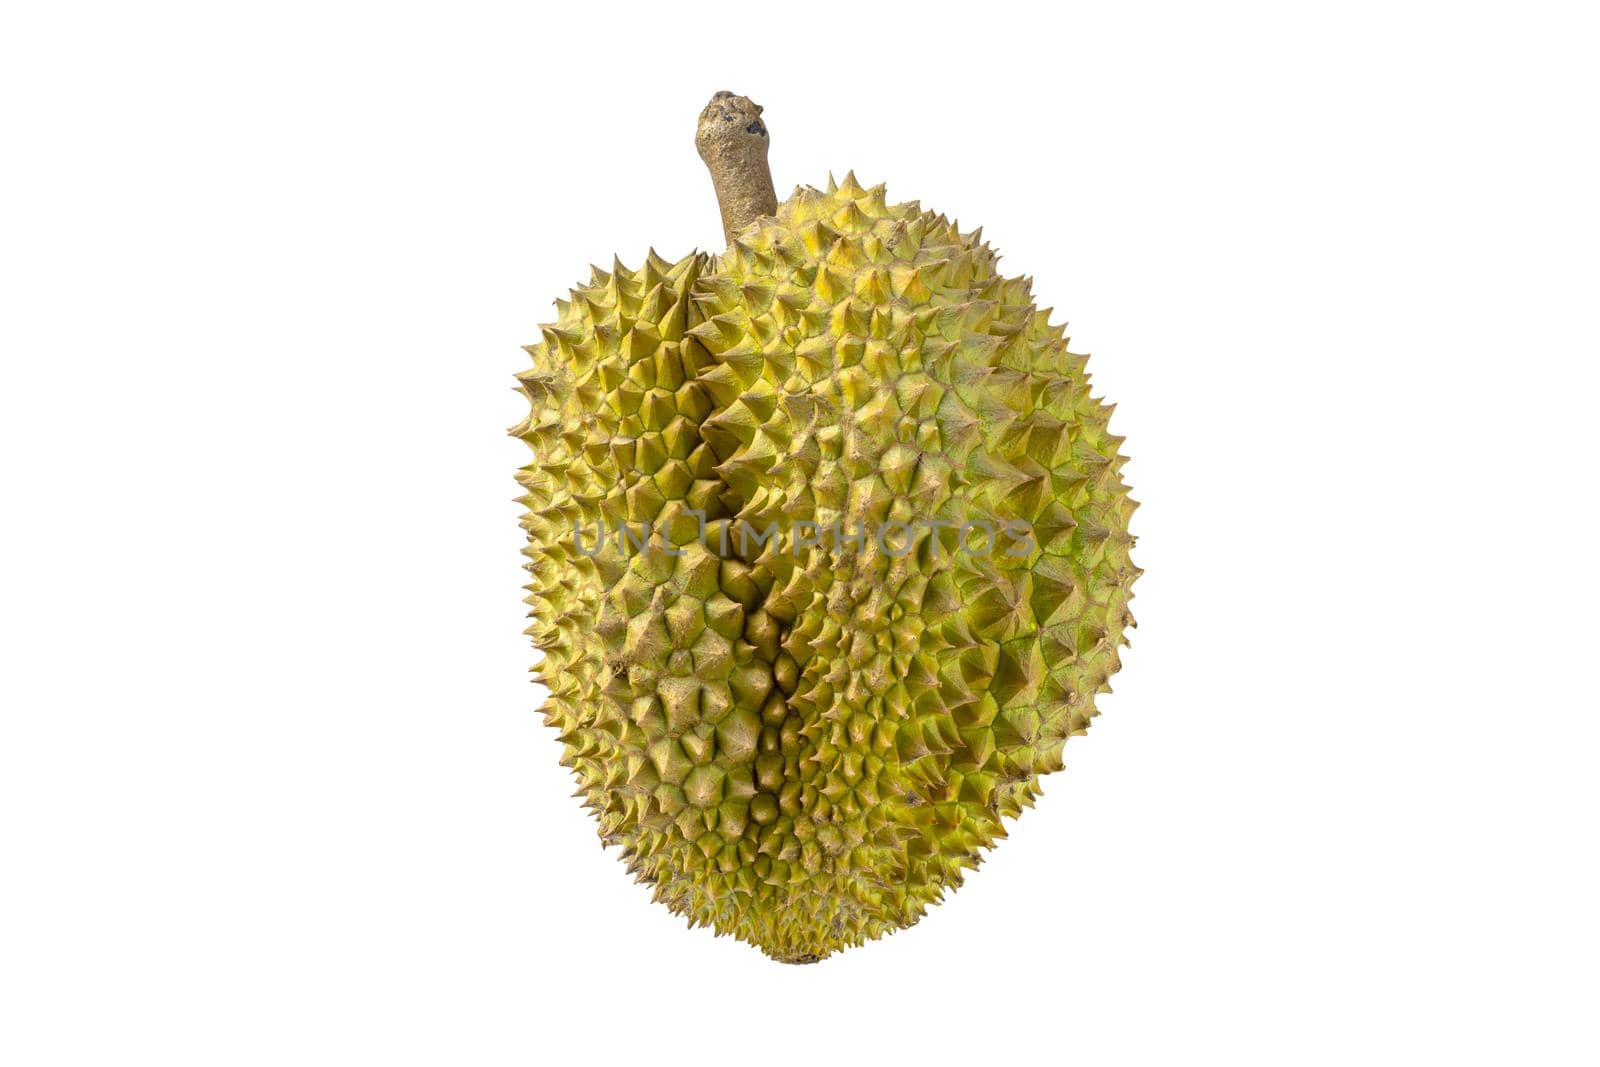 Ripe durian is ready to eat isolated on white background